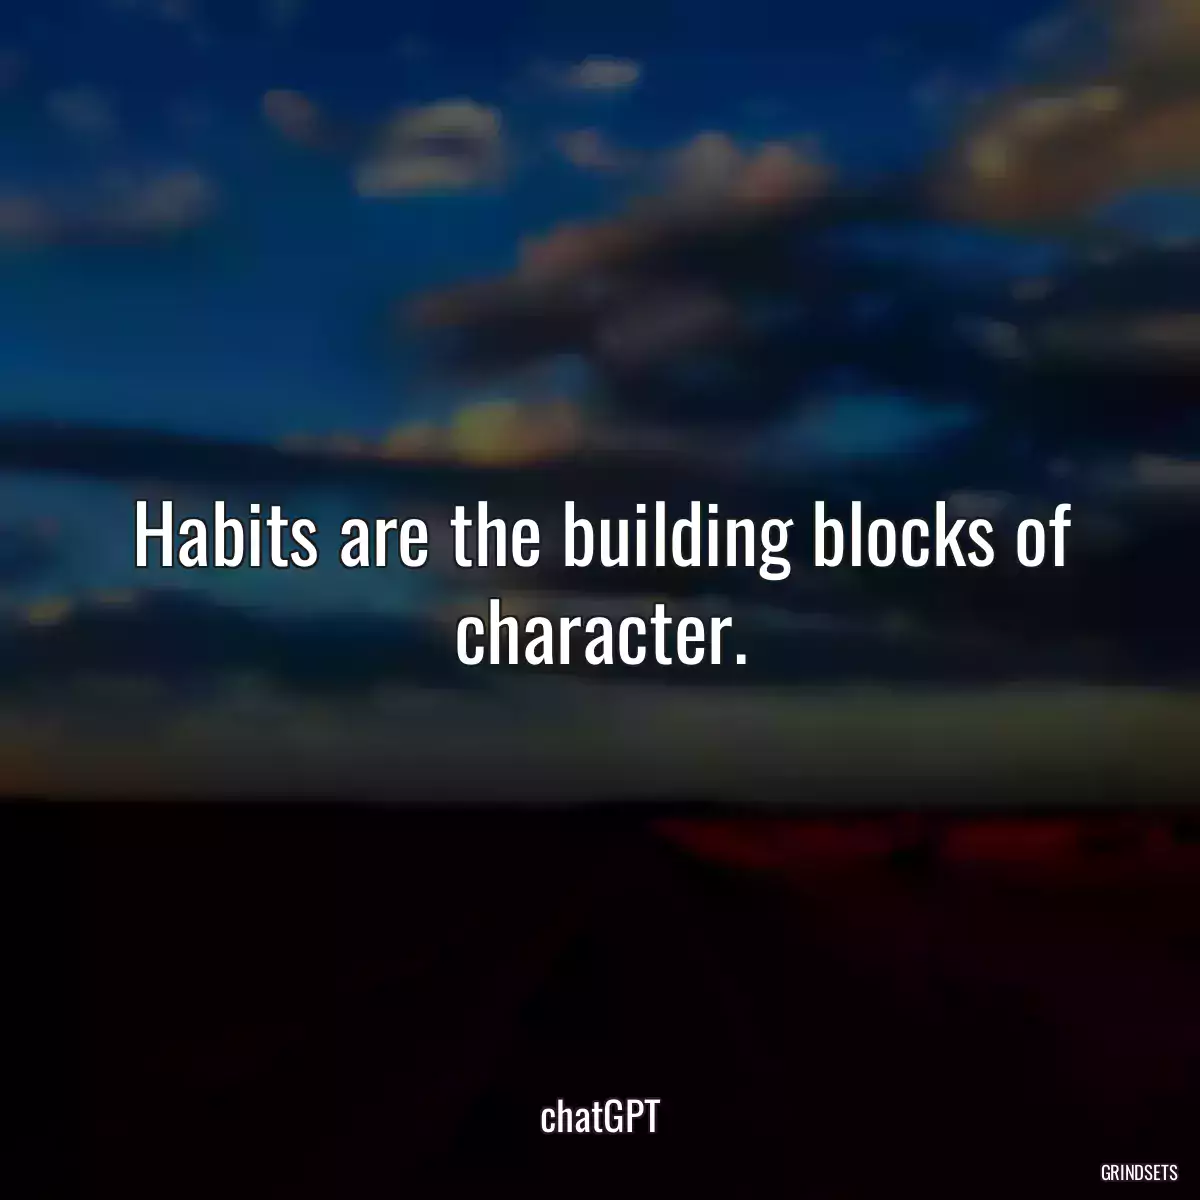 Habits are the building blocks of character.